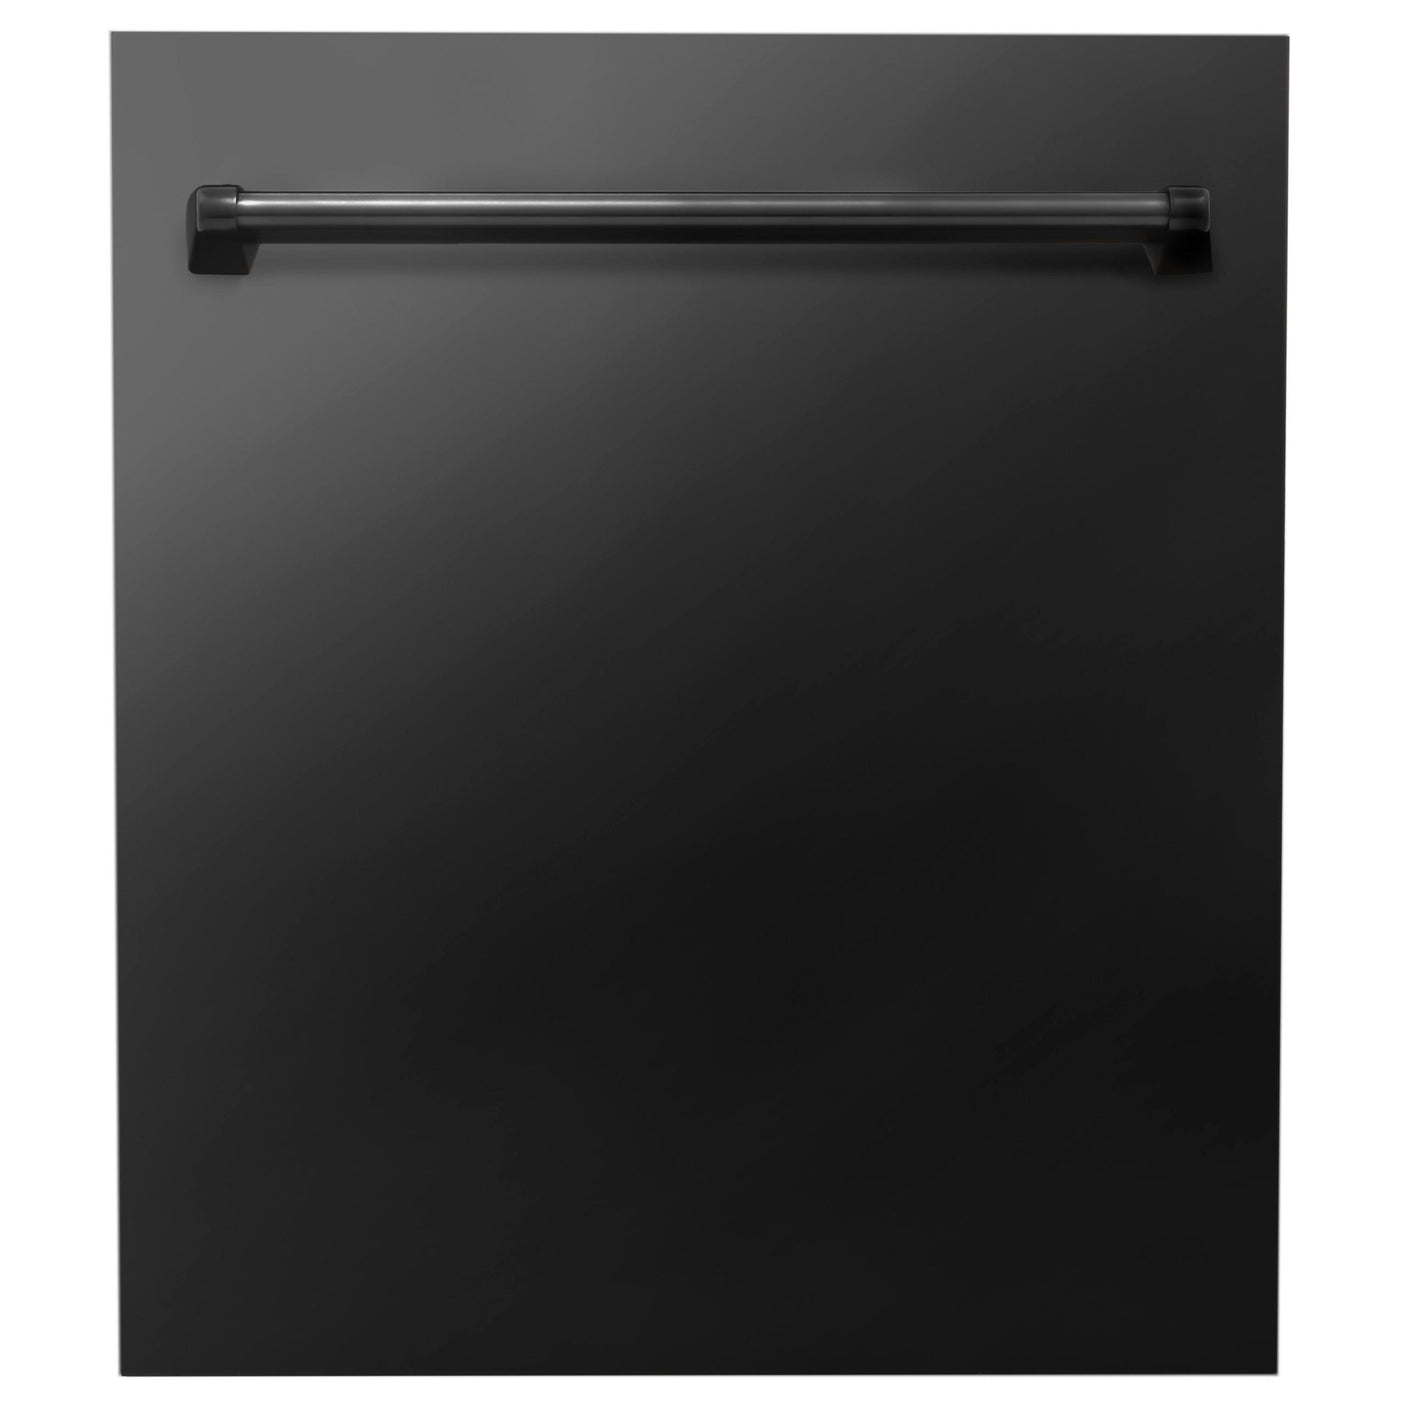 ZLINE 24 in. Top Control Dishwasher with Stainless Steel Tub and Traditional Style Handle, 52dBa (DW-24) [Color: Black Stainless Steel]